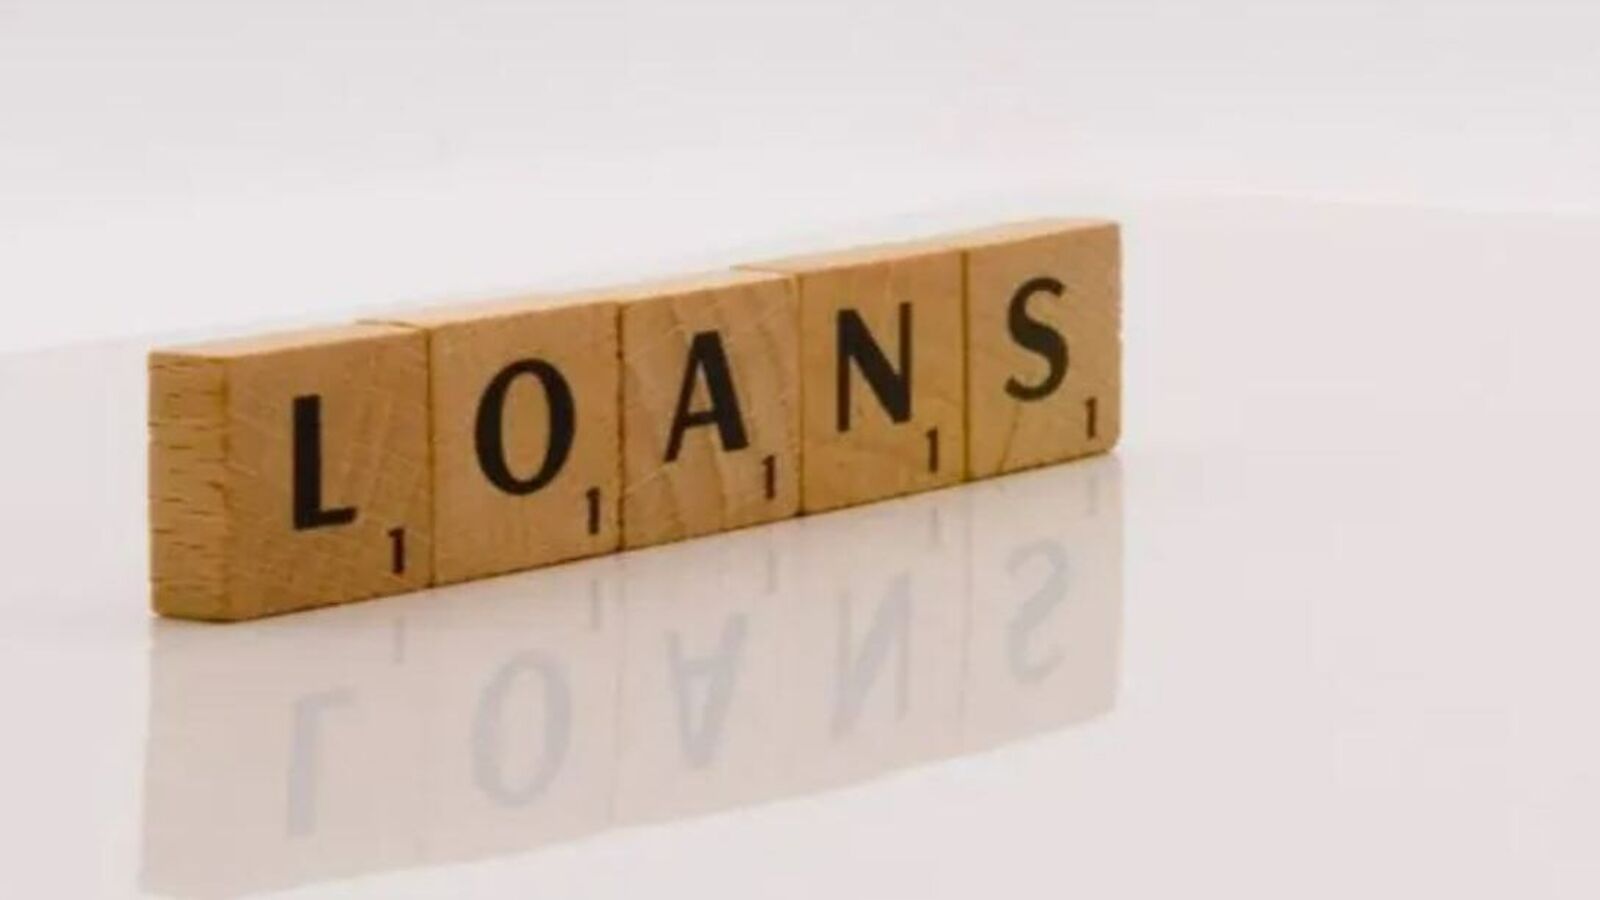 Personal loans vs payday loans: What is the difference between the two? MintGenie explains